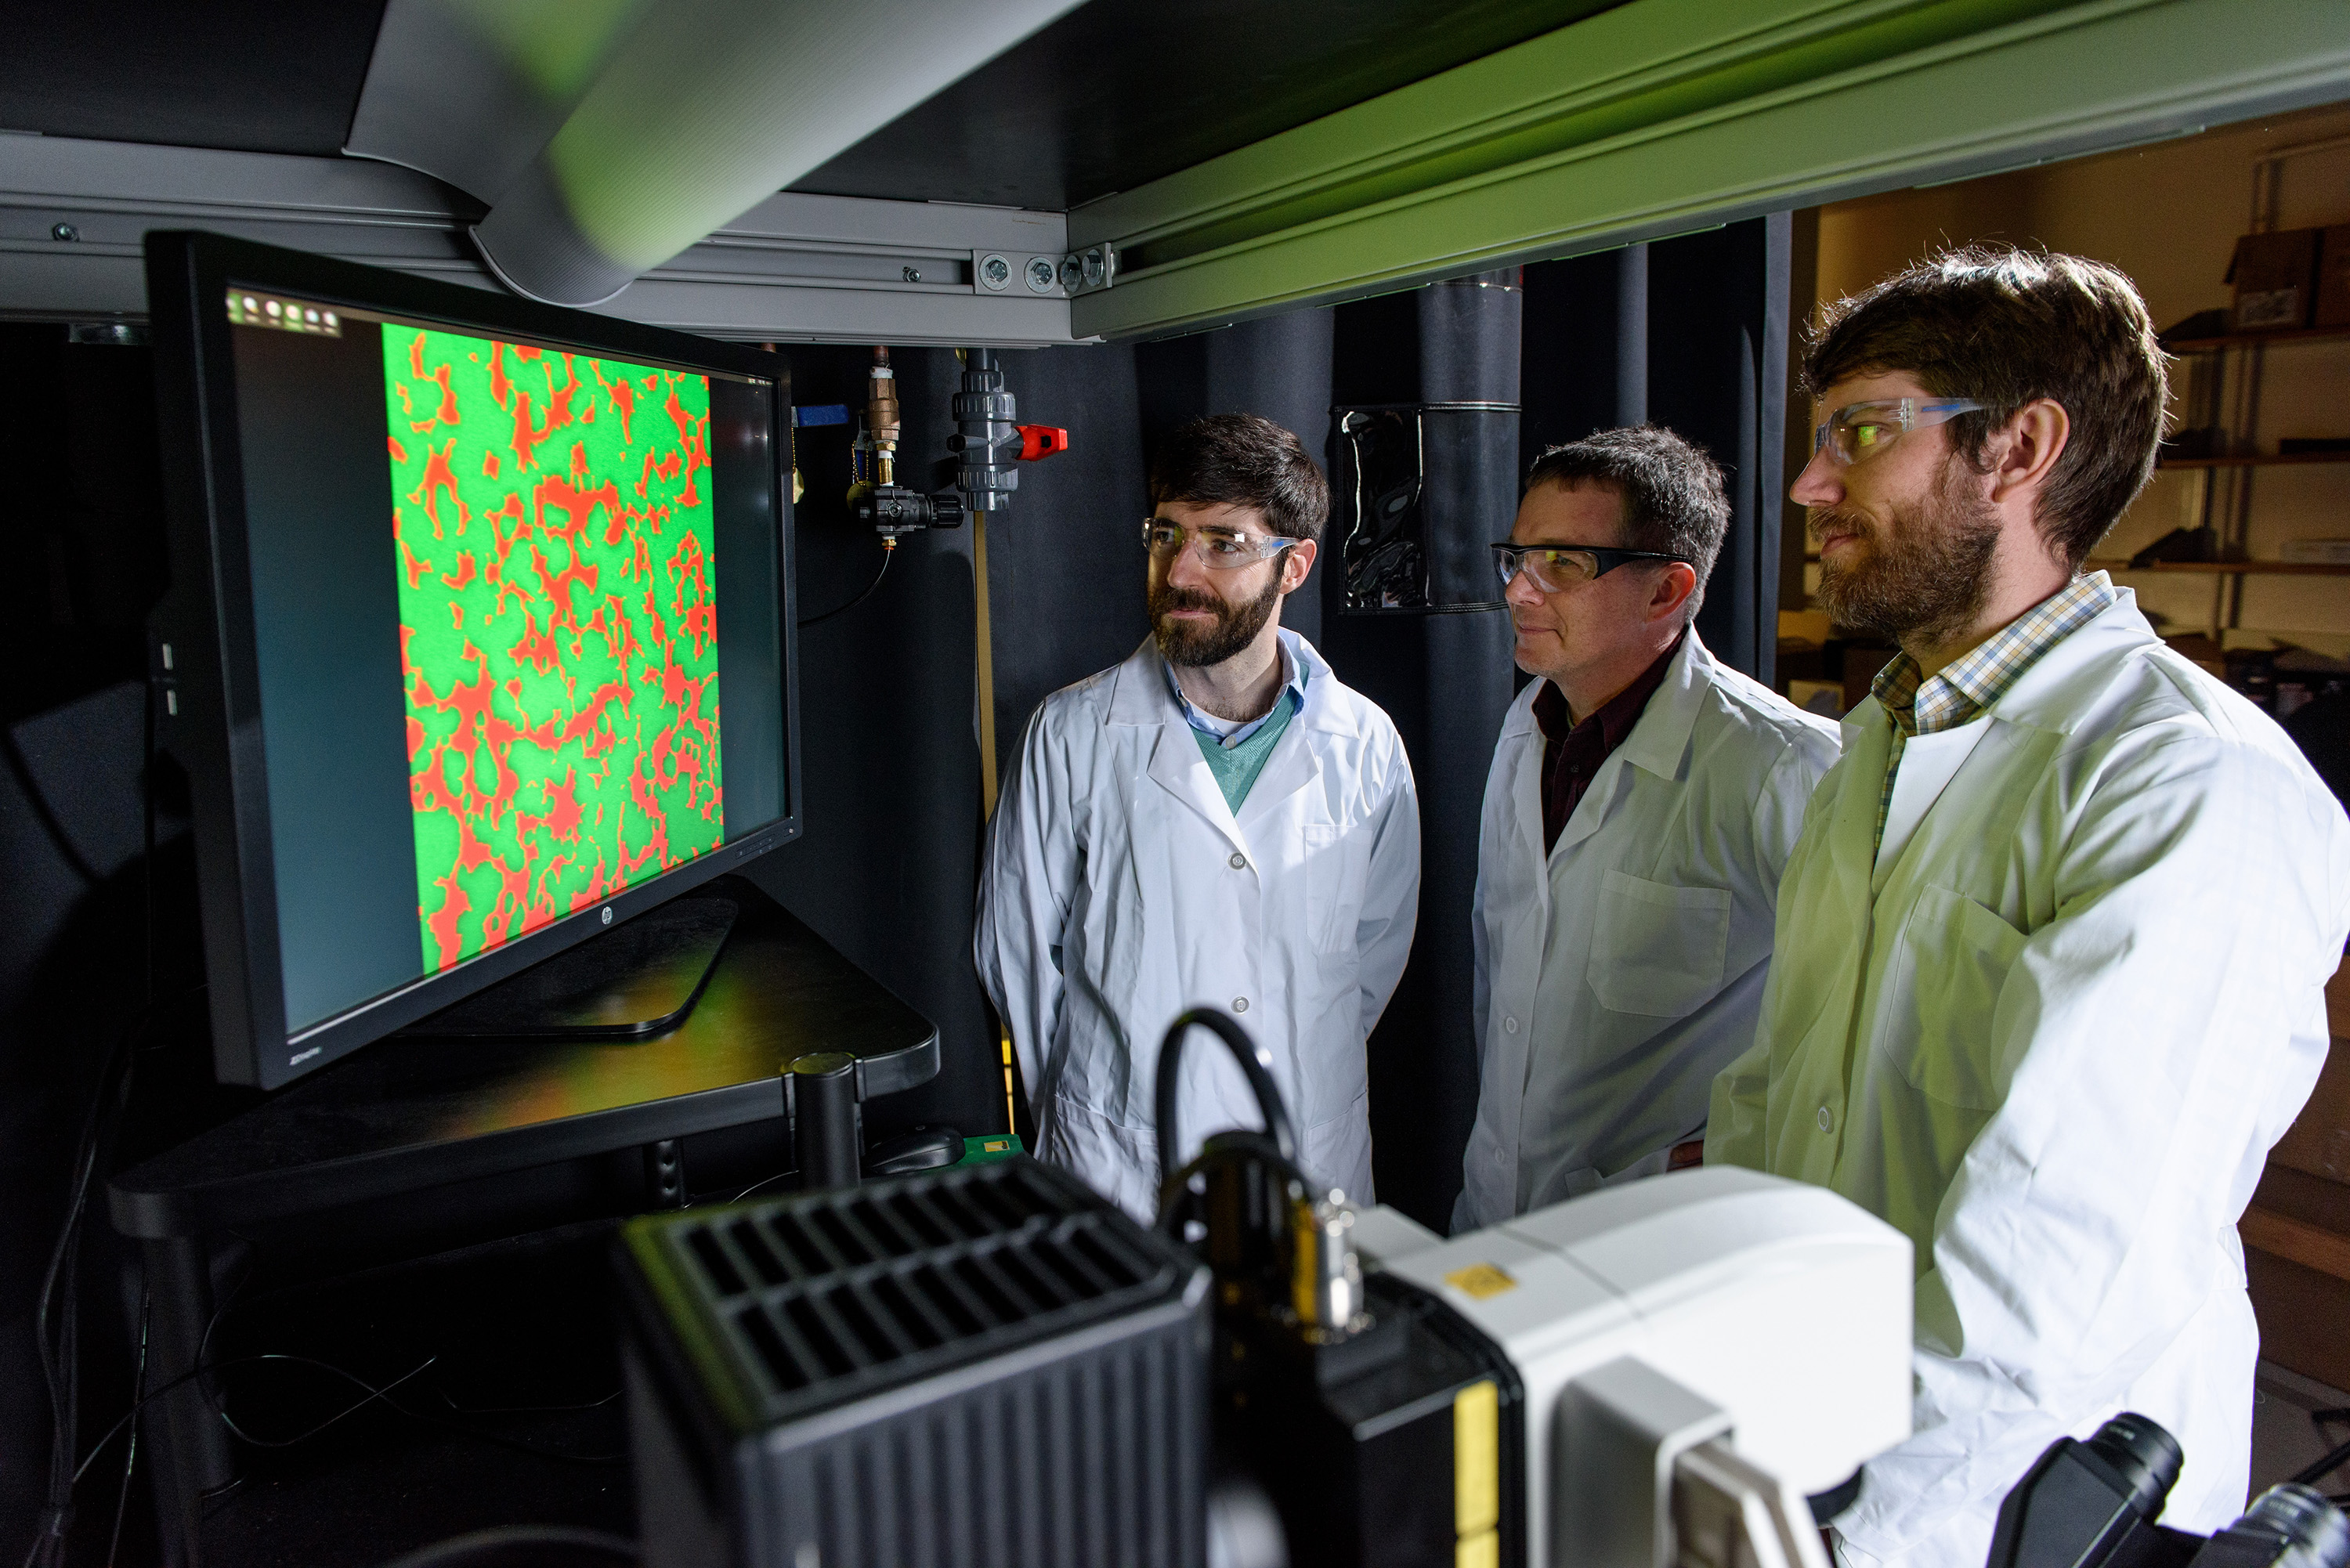 Physicist Peter Yunker, microbiologist Brian Hammer, and evolutionary biologist Will Ratcliff (left to right) look at a screen of bacteria that have phase separated into divided colonies in Yunker's lab at Georgia Tech. Credit: Georgia Tech / Rob Felt